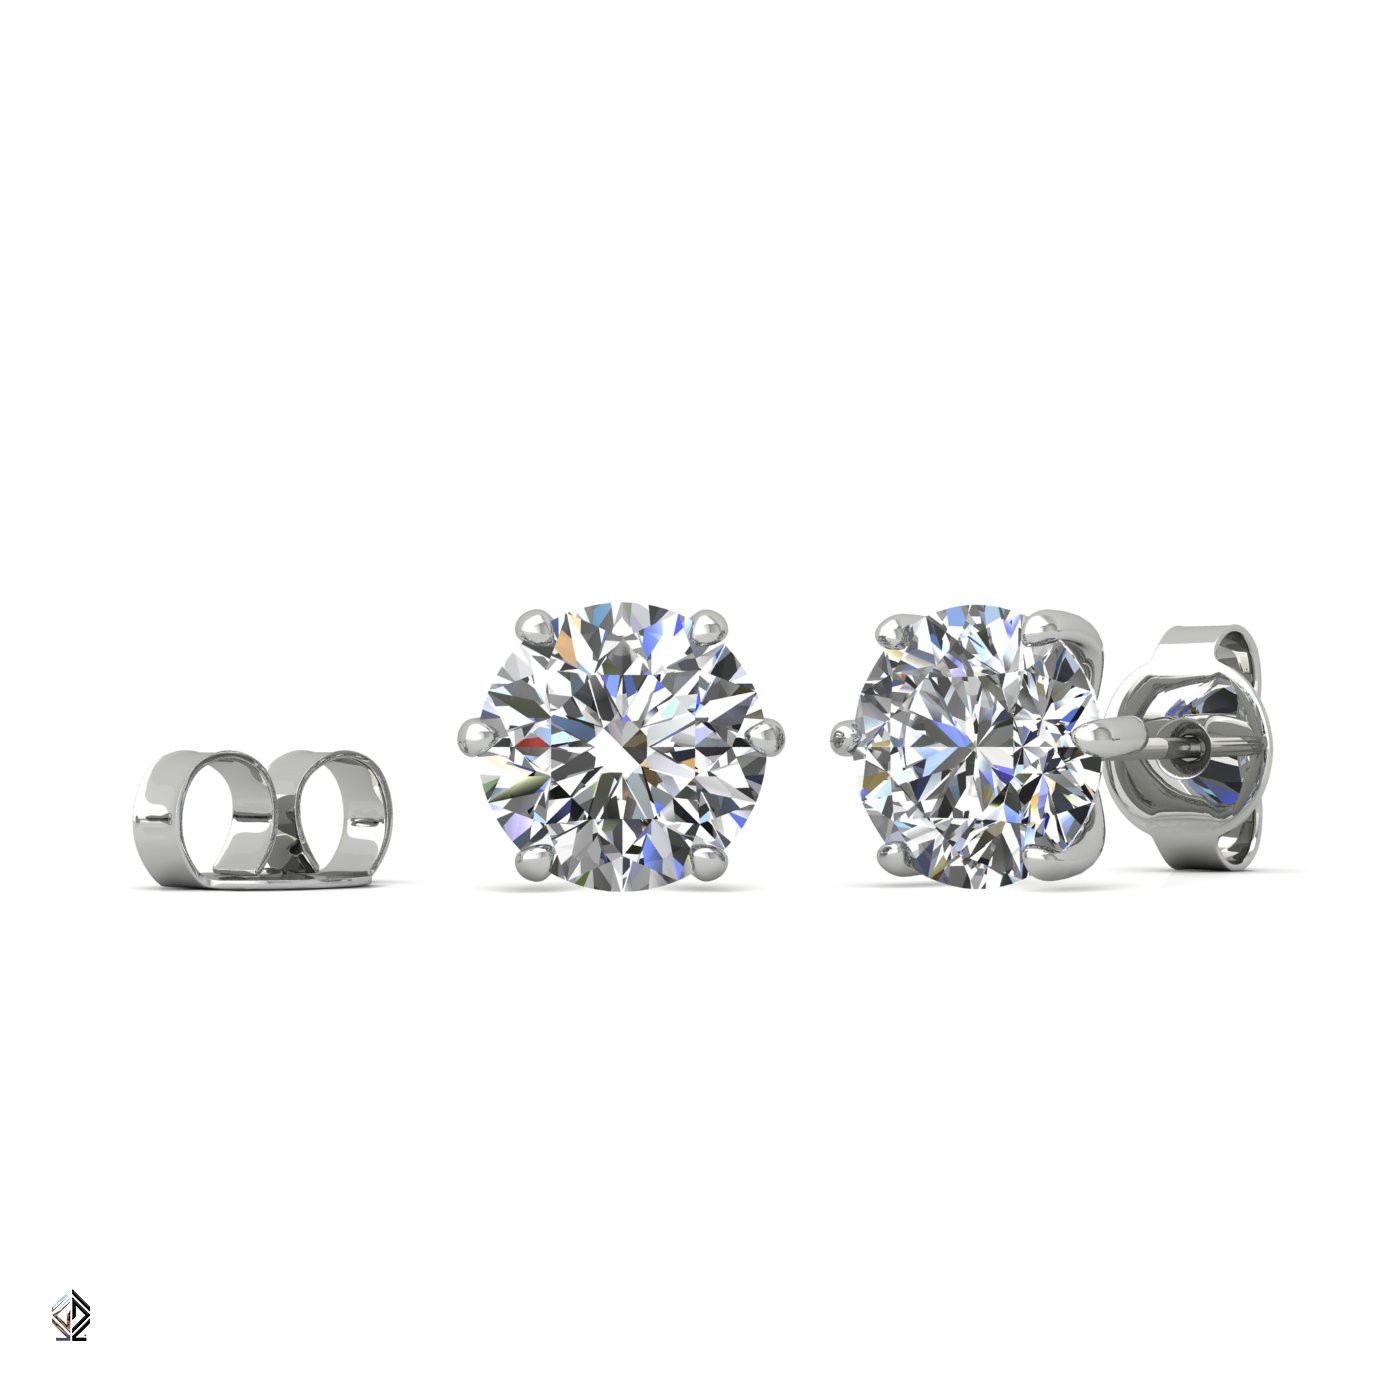 18k white gold 1.2 ct each (2,4 tcw) 6 prongs round shape diamond earrings Photos & images